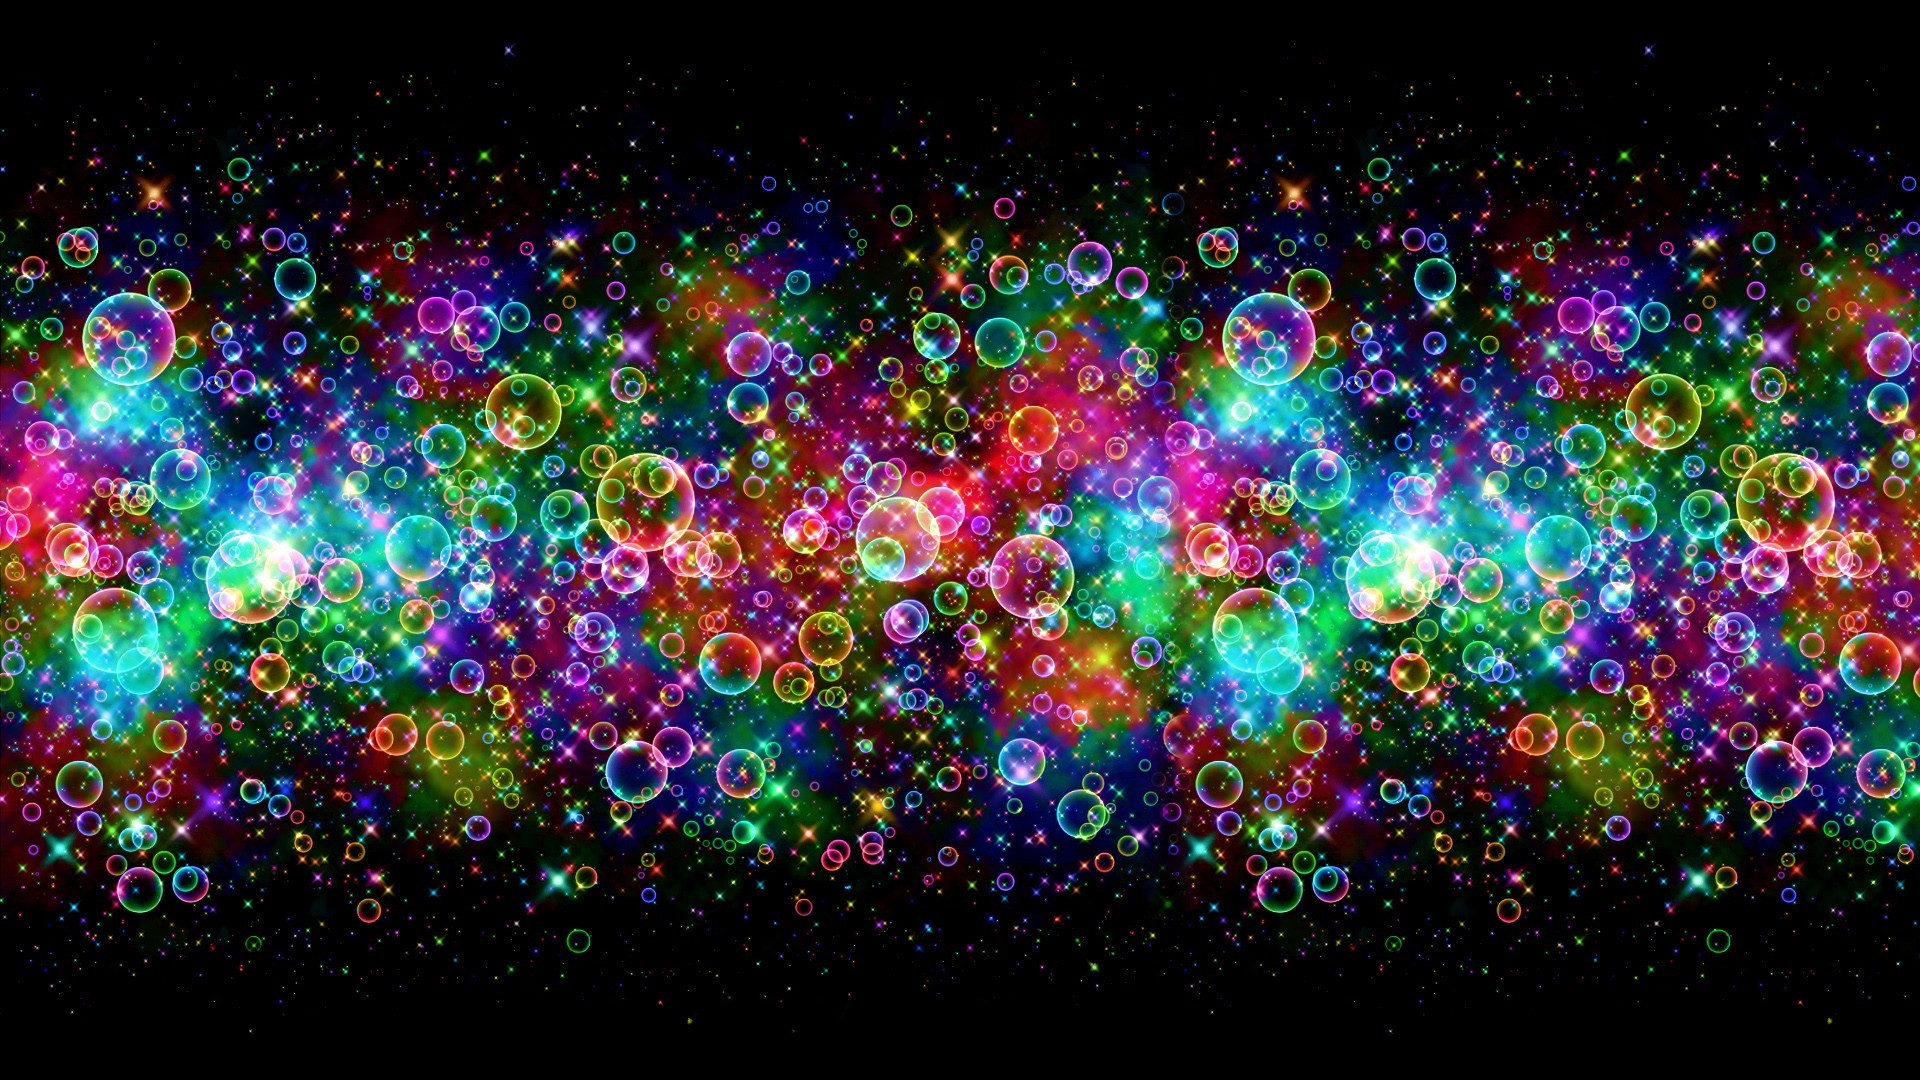 Free HD Abstract Backgrounds 19201080 Abstract Pictures Wallpapers 28 Wallpapers Adorable